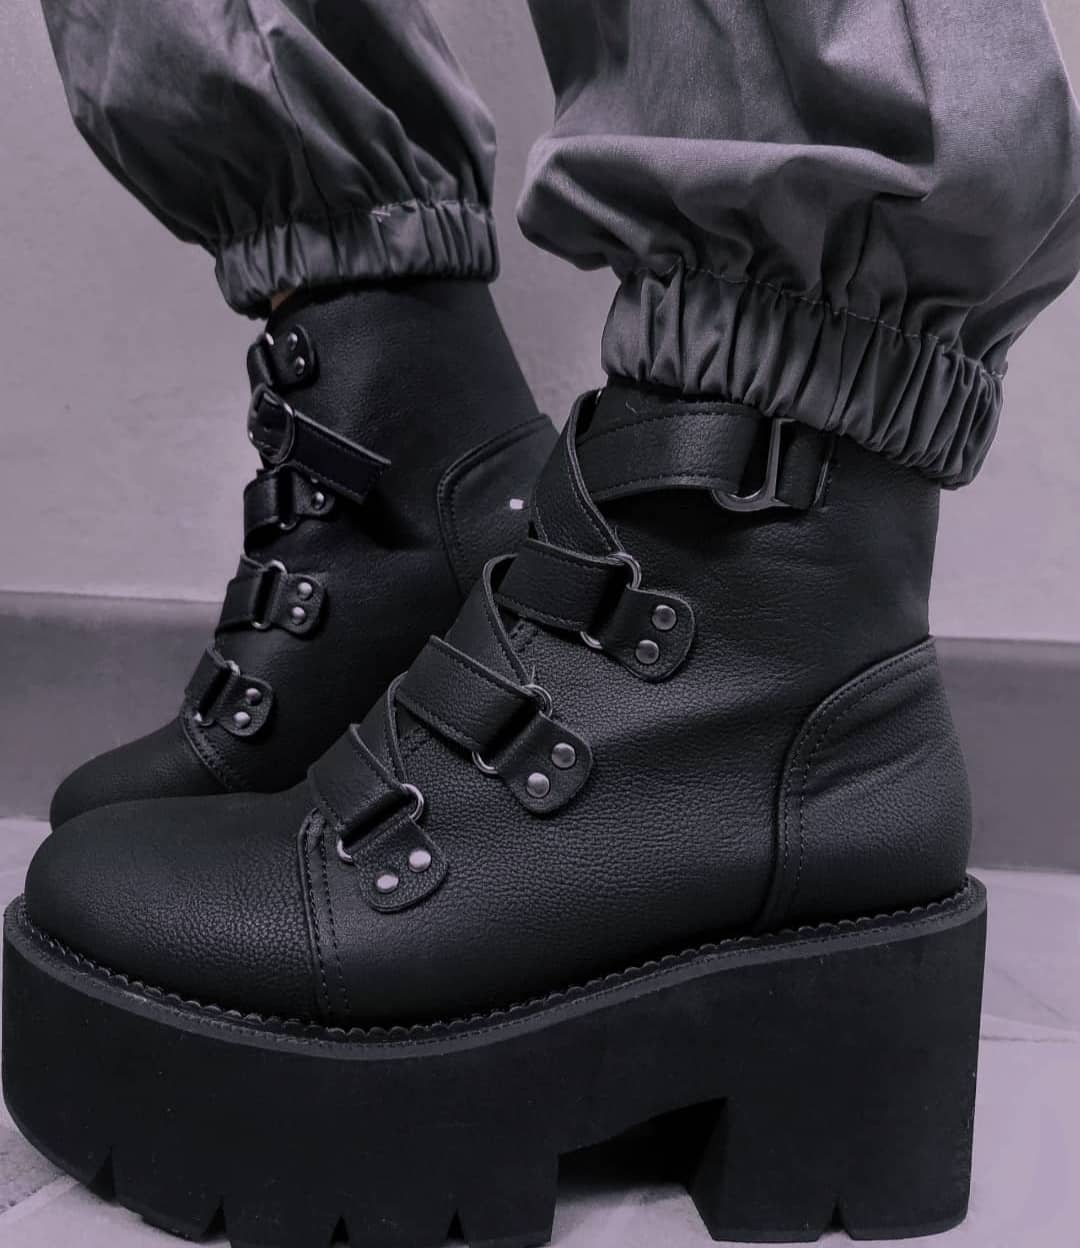 Buckle Buddy Boots